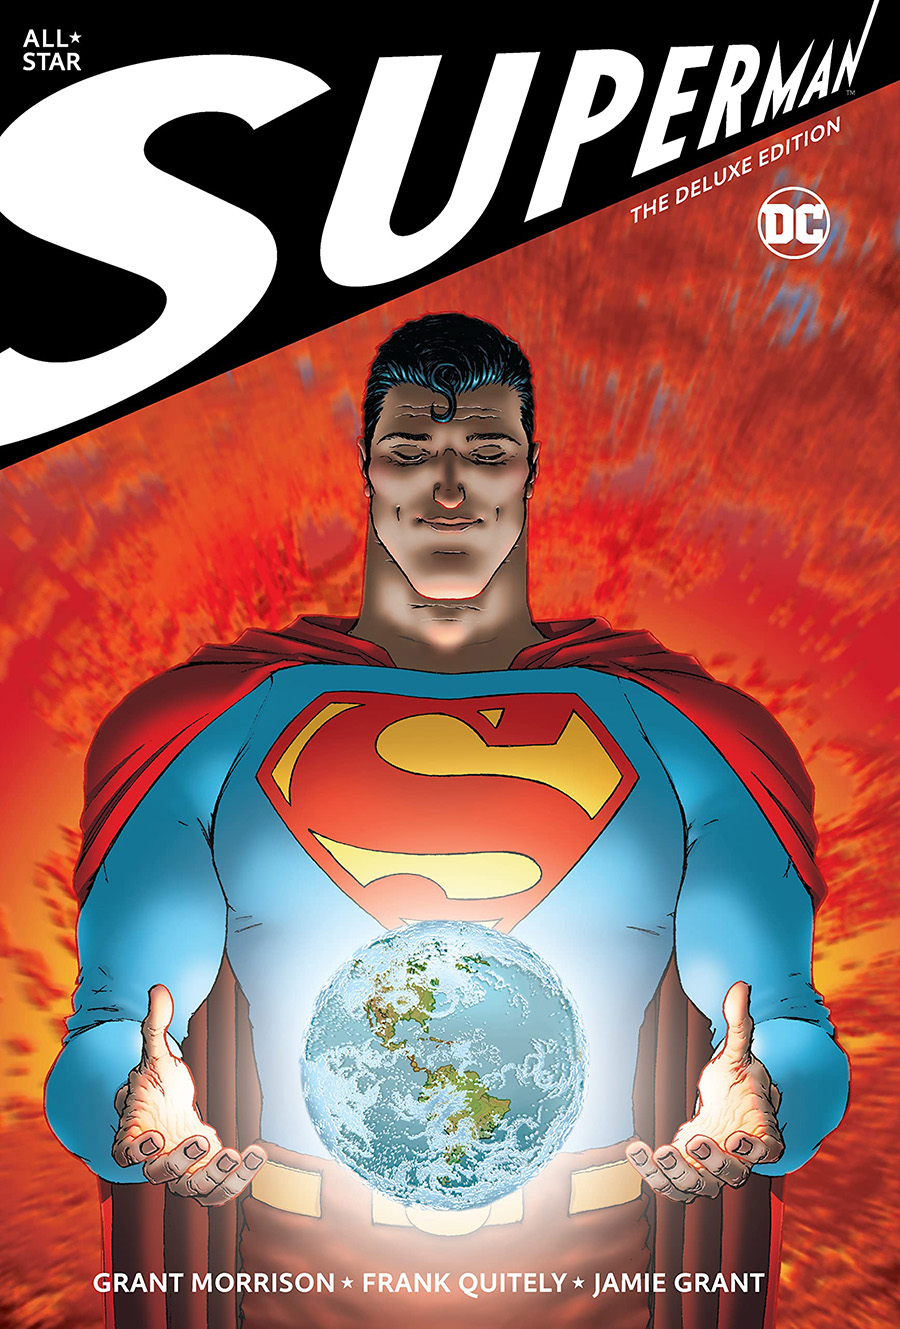 All Star Superman The Deluxe Edition HC